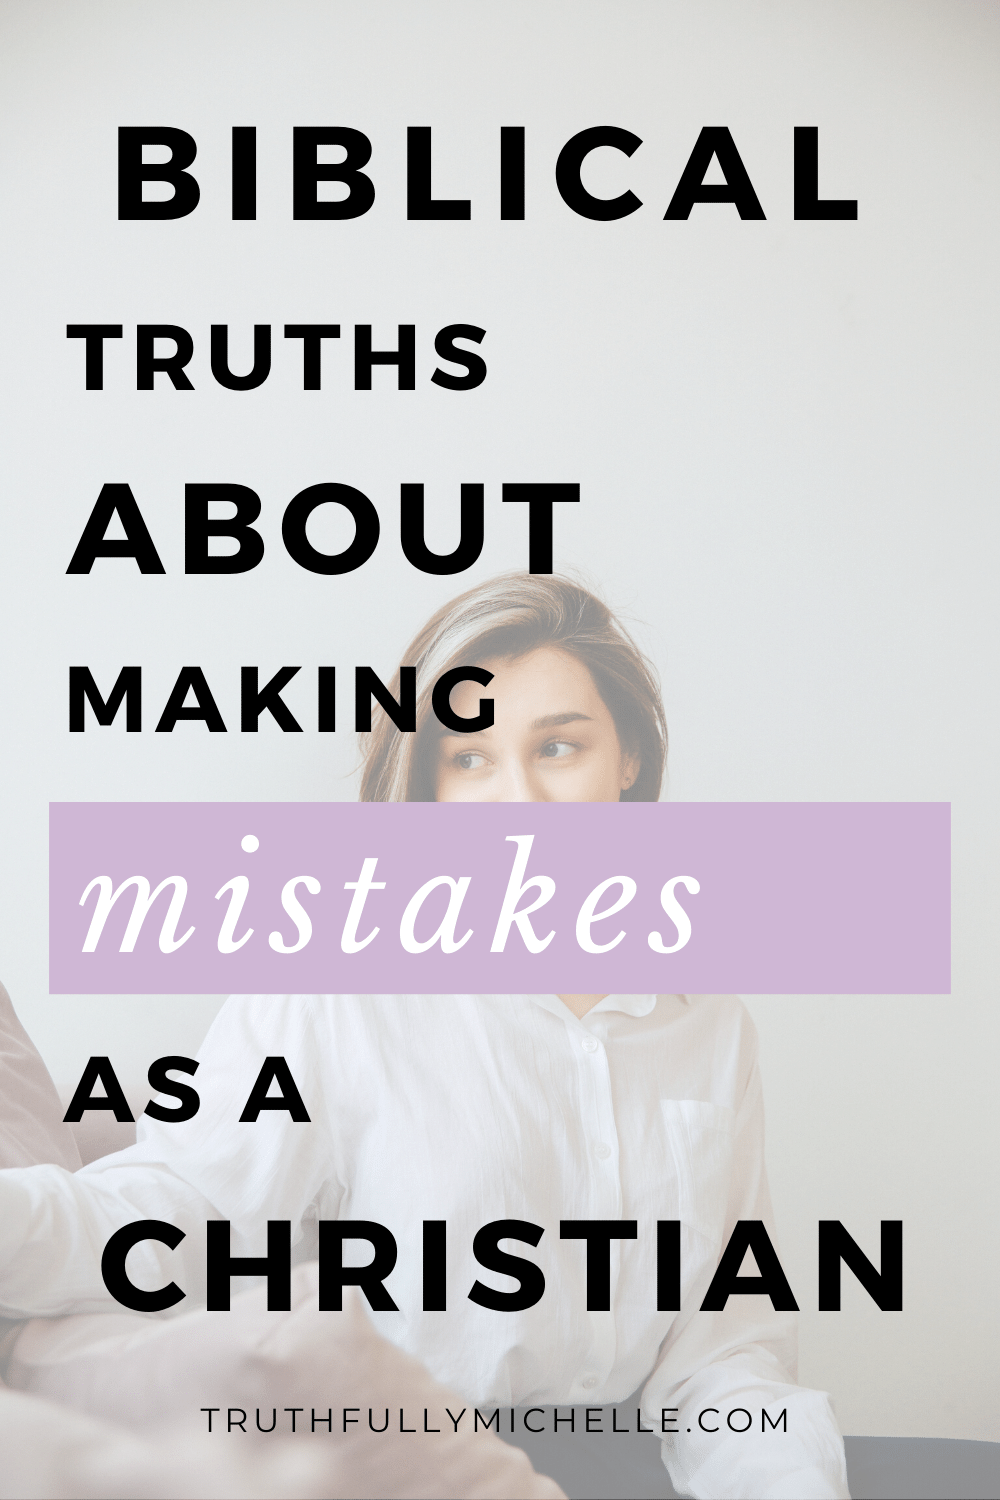 What Does God Say About Mistakes